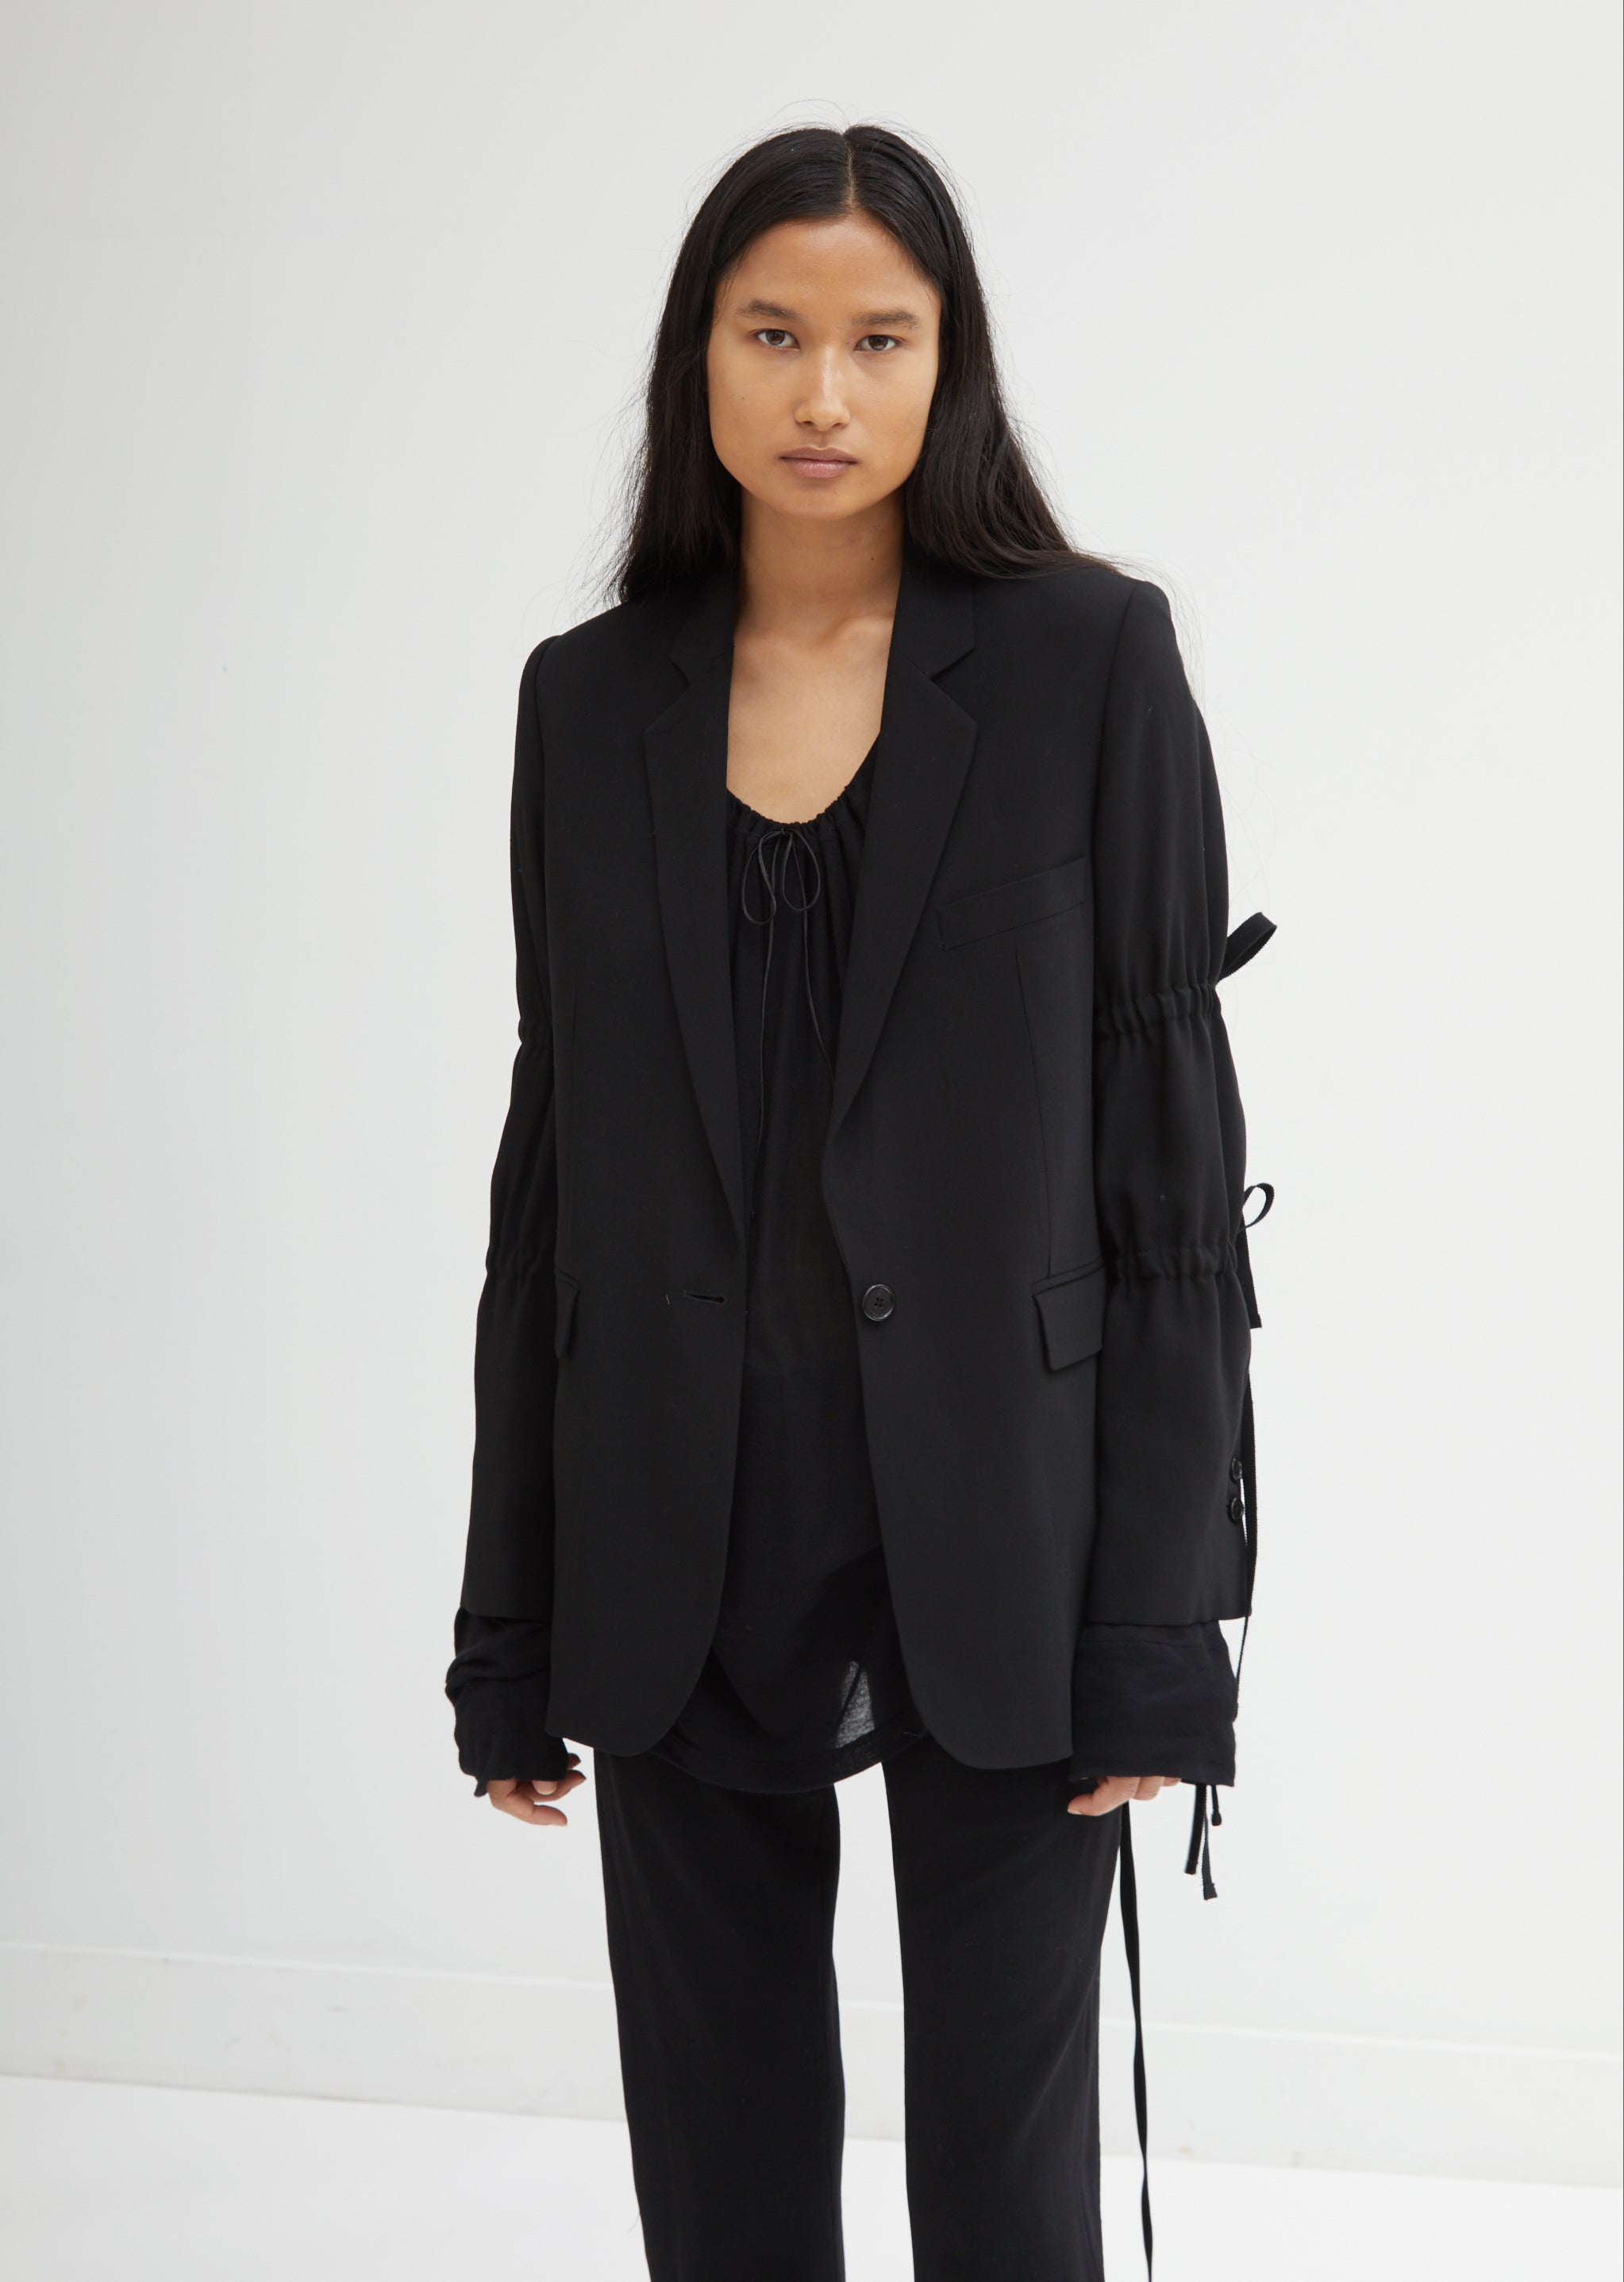 Blazer With Ribbon Details On The Sleeves by Ann Demeulemeester- La ...